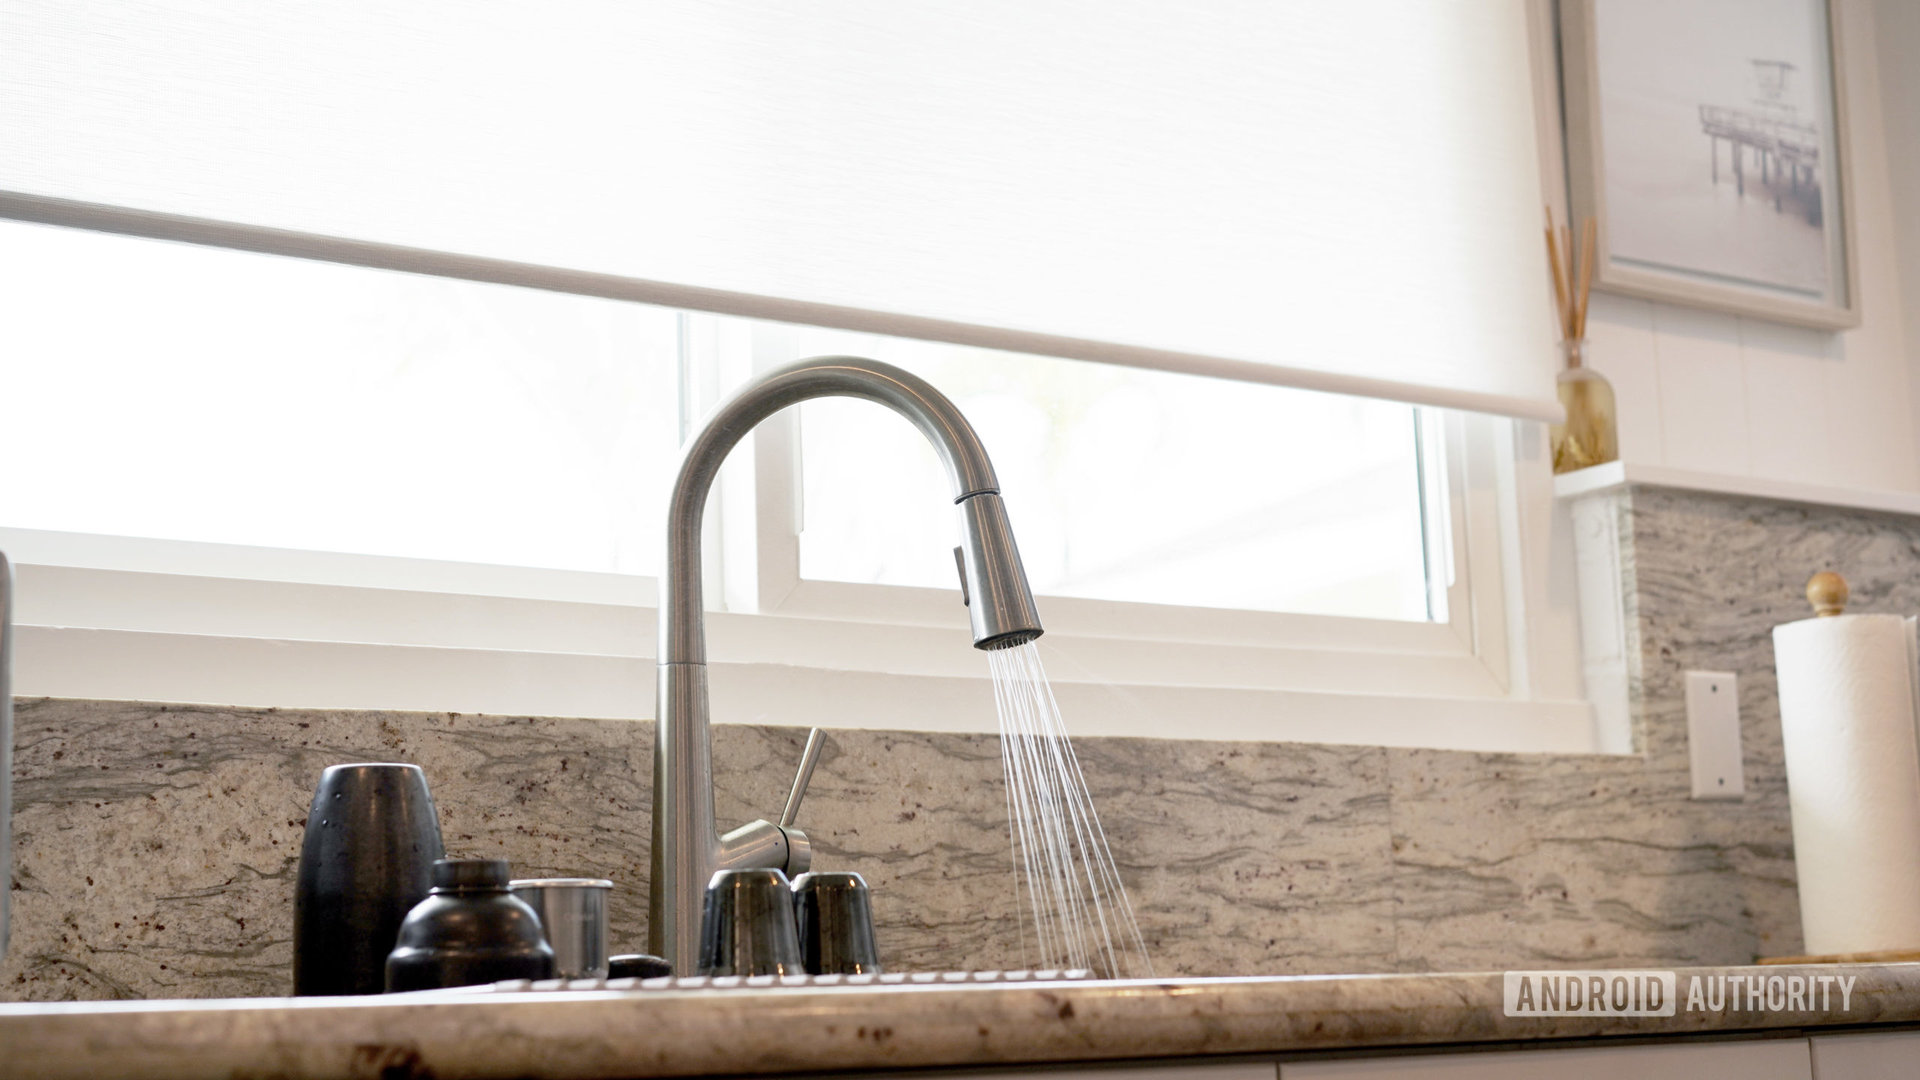 A smart blinds lifts to allow a user to wash dishes without splashing it.